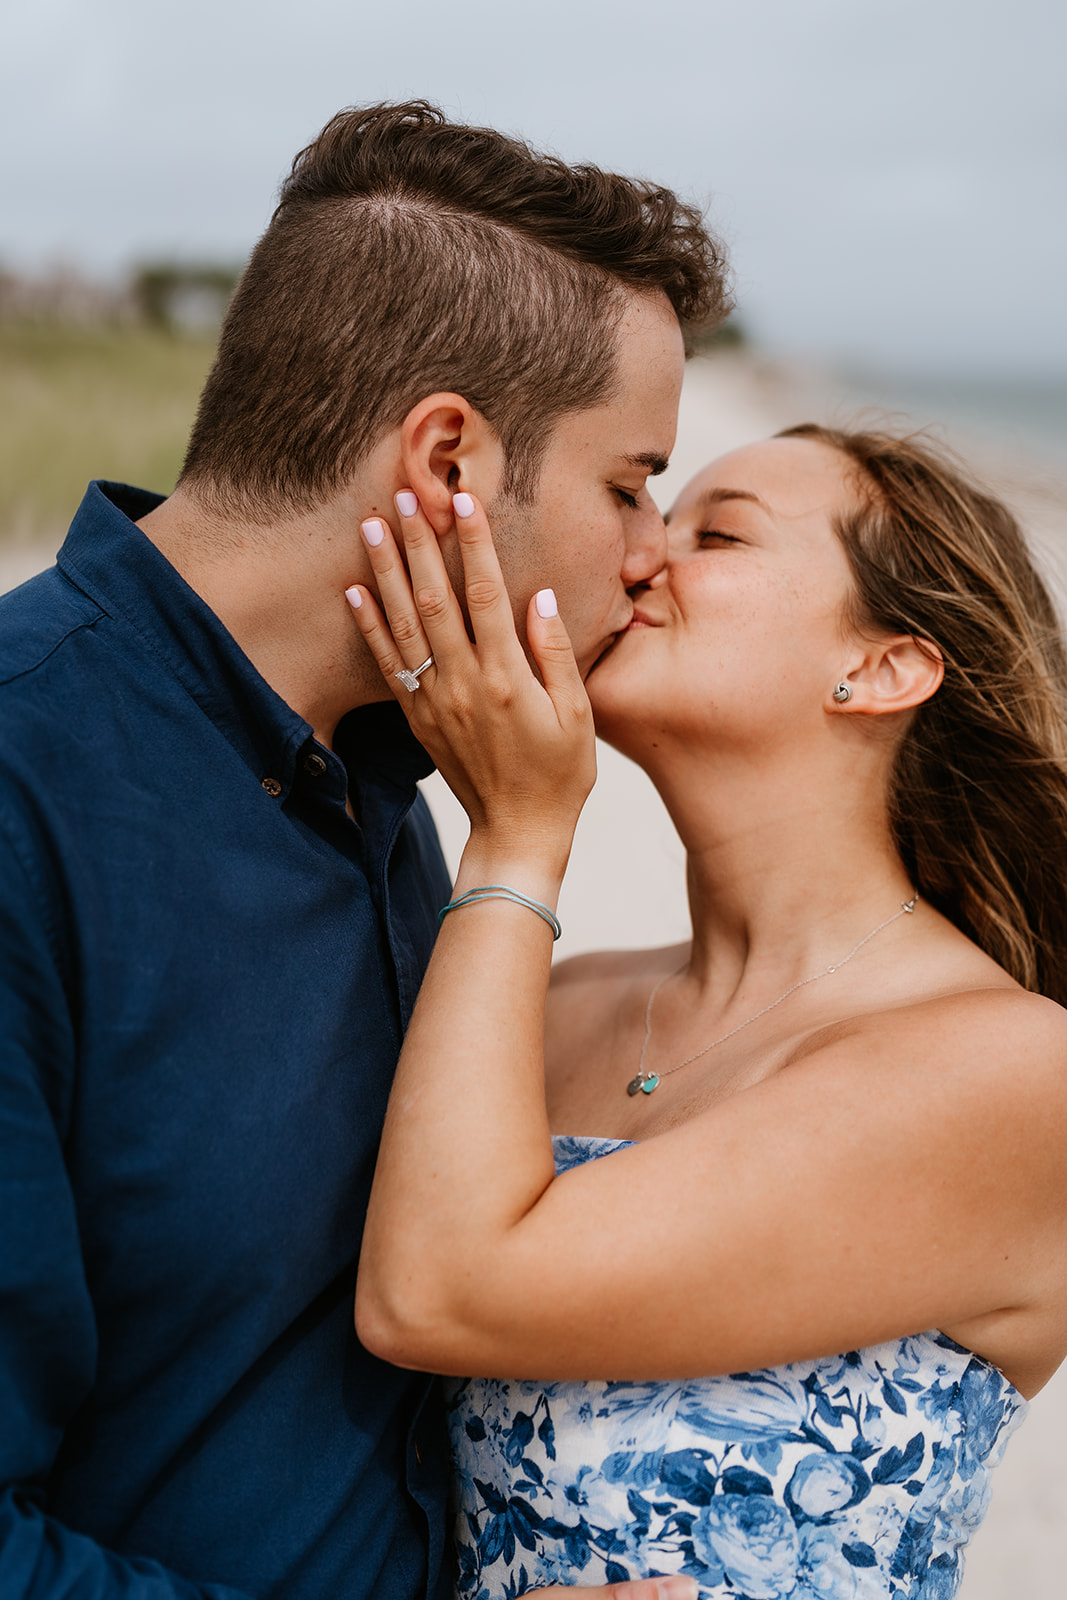 A couple kissing along a sandy beach in Martha's Vineyard with boats in the background.